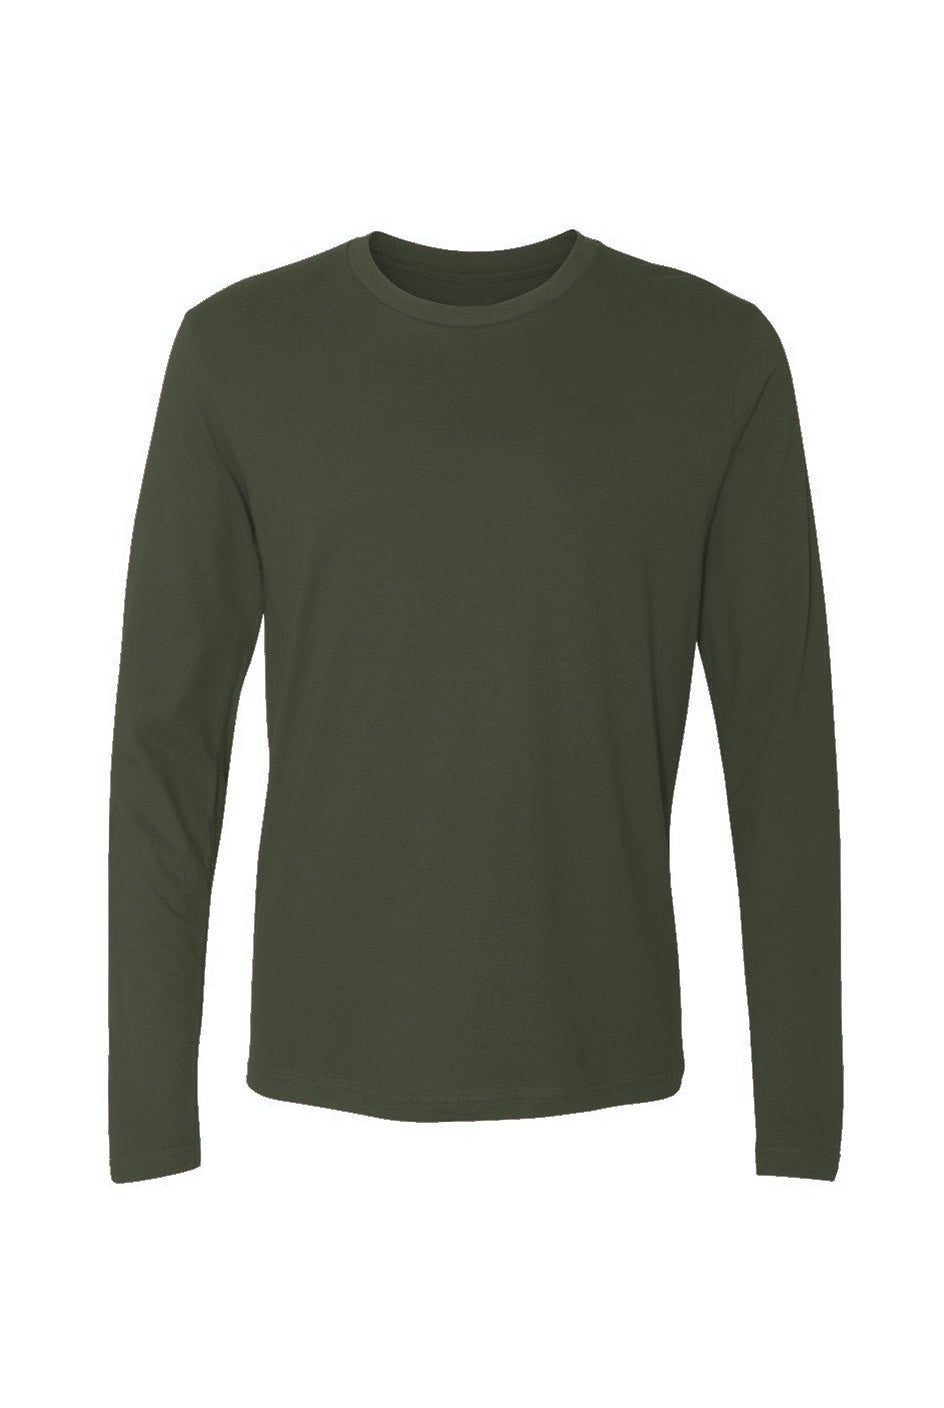 Men's Military Green Cotton Long-Sleeve T-Shirt - Men's Long-Sleeve T-Shirts - Apliiq - Men's Cotton Long-Sleeve T-Shirt by Dragon Foxx™ - APQ-4388659S5A0 - xs - military green - Dragon Foxx™ - Dragon Foxx™ Men's Cotton Long-Sleeve T-Shirt - Dragon Foxx™ Men's Military Green Cotton Long-Sleeve T-Shirt